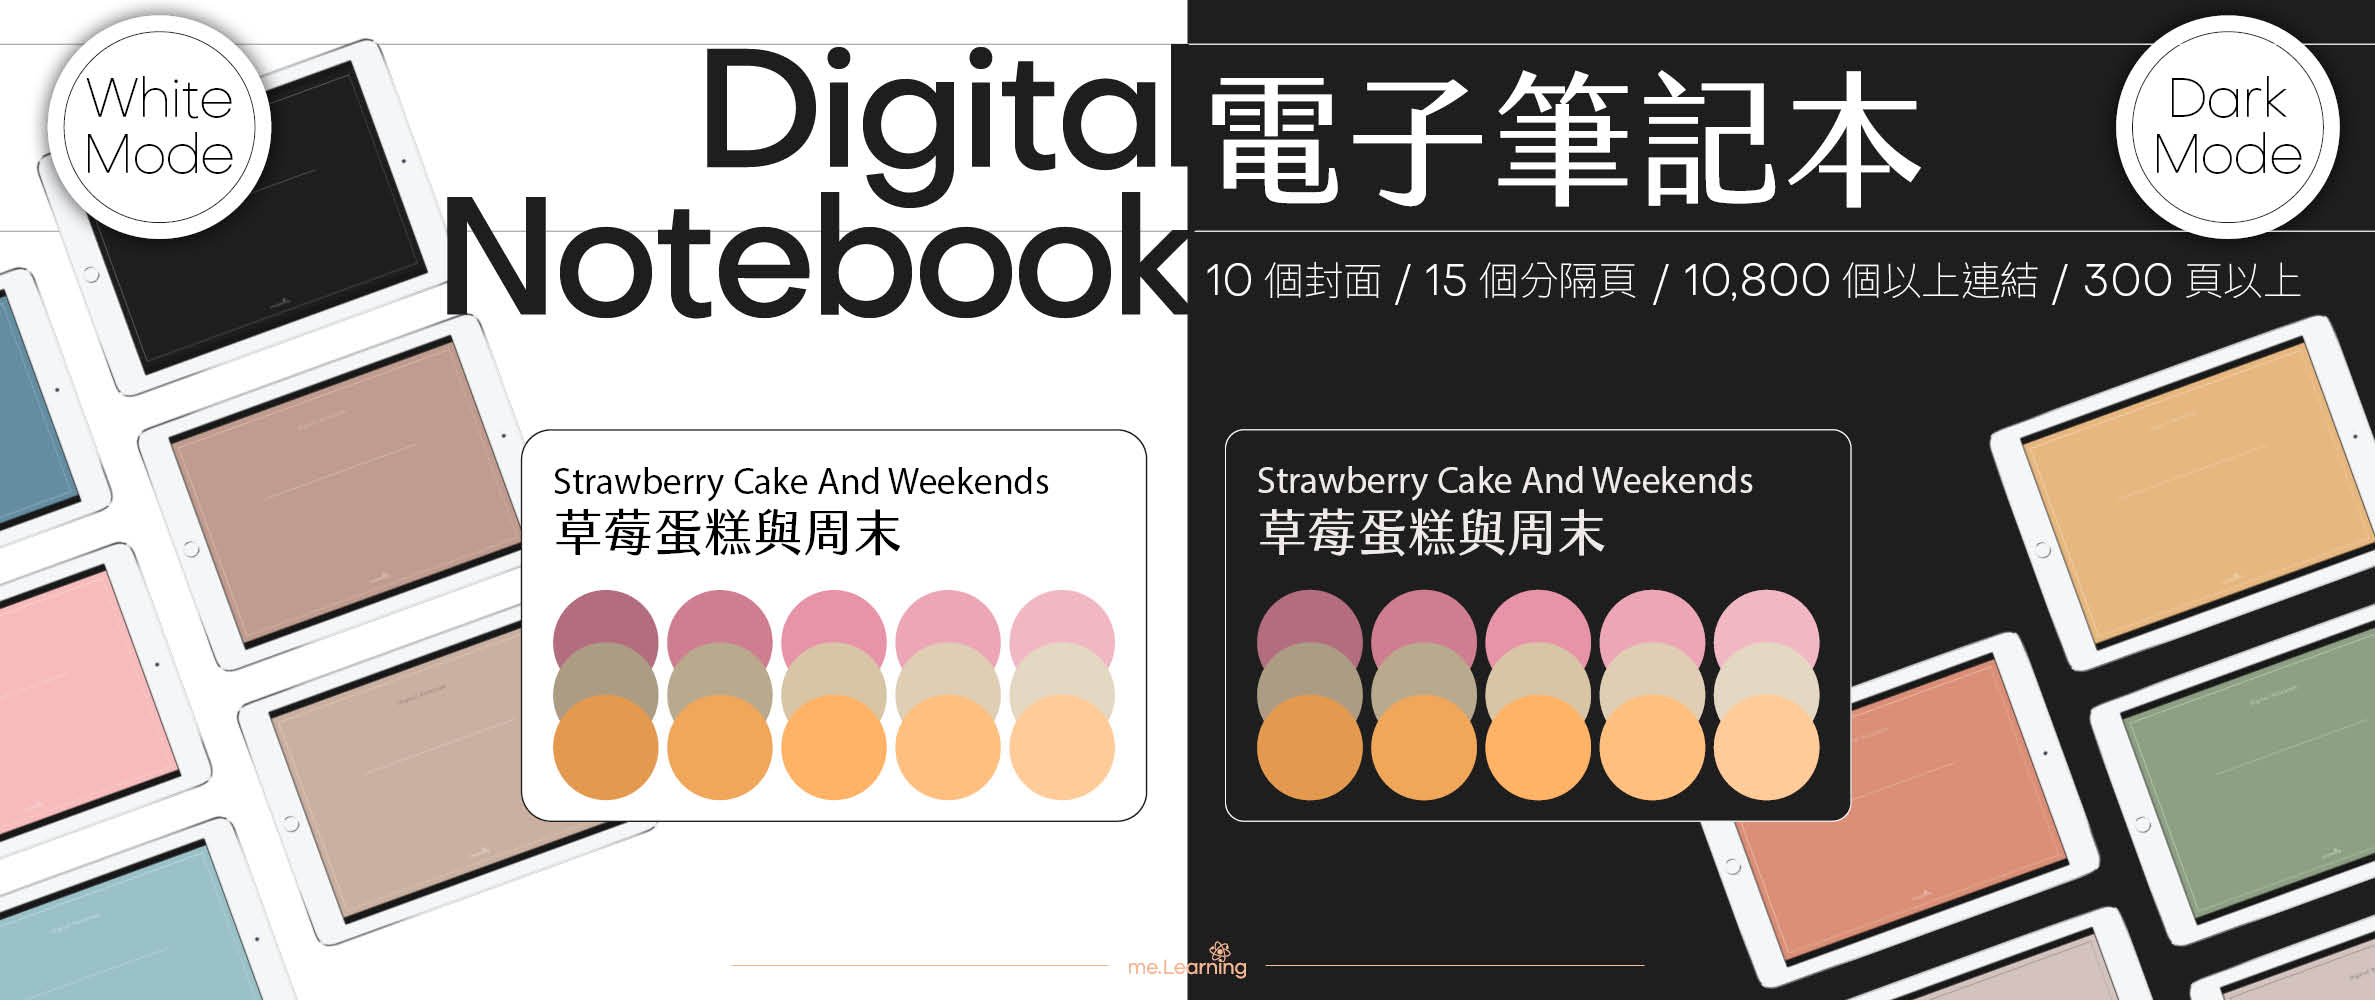 Notebook-Landscape-Solid Color Cover-15 Tabs-Strawberry Cake And Weekends-White Mode 不想念書時上市 | me.Learning